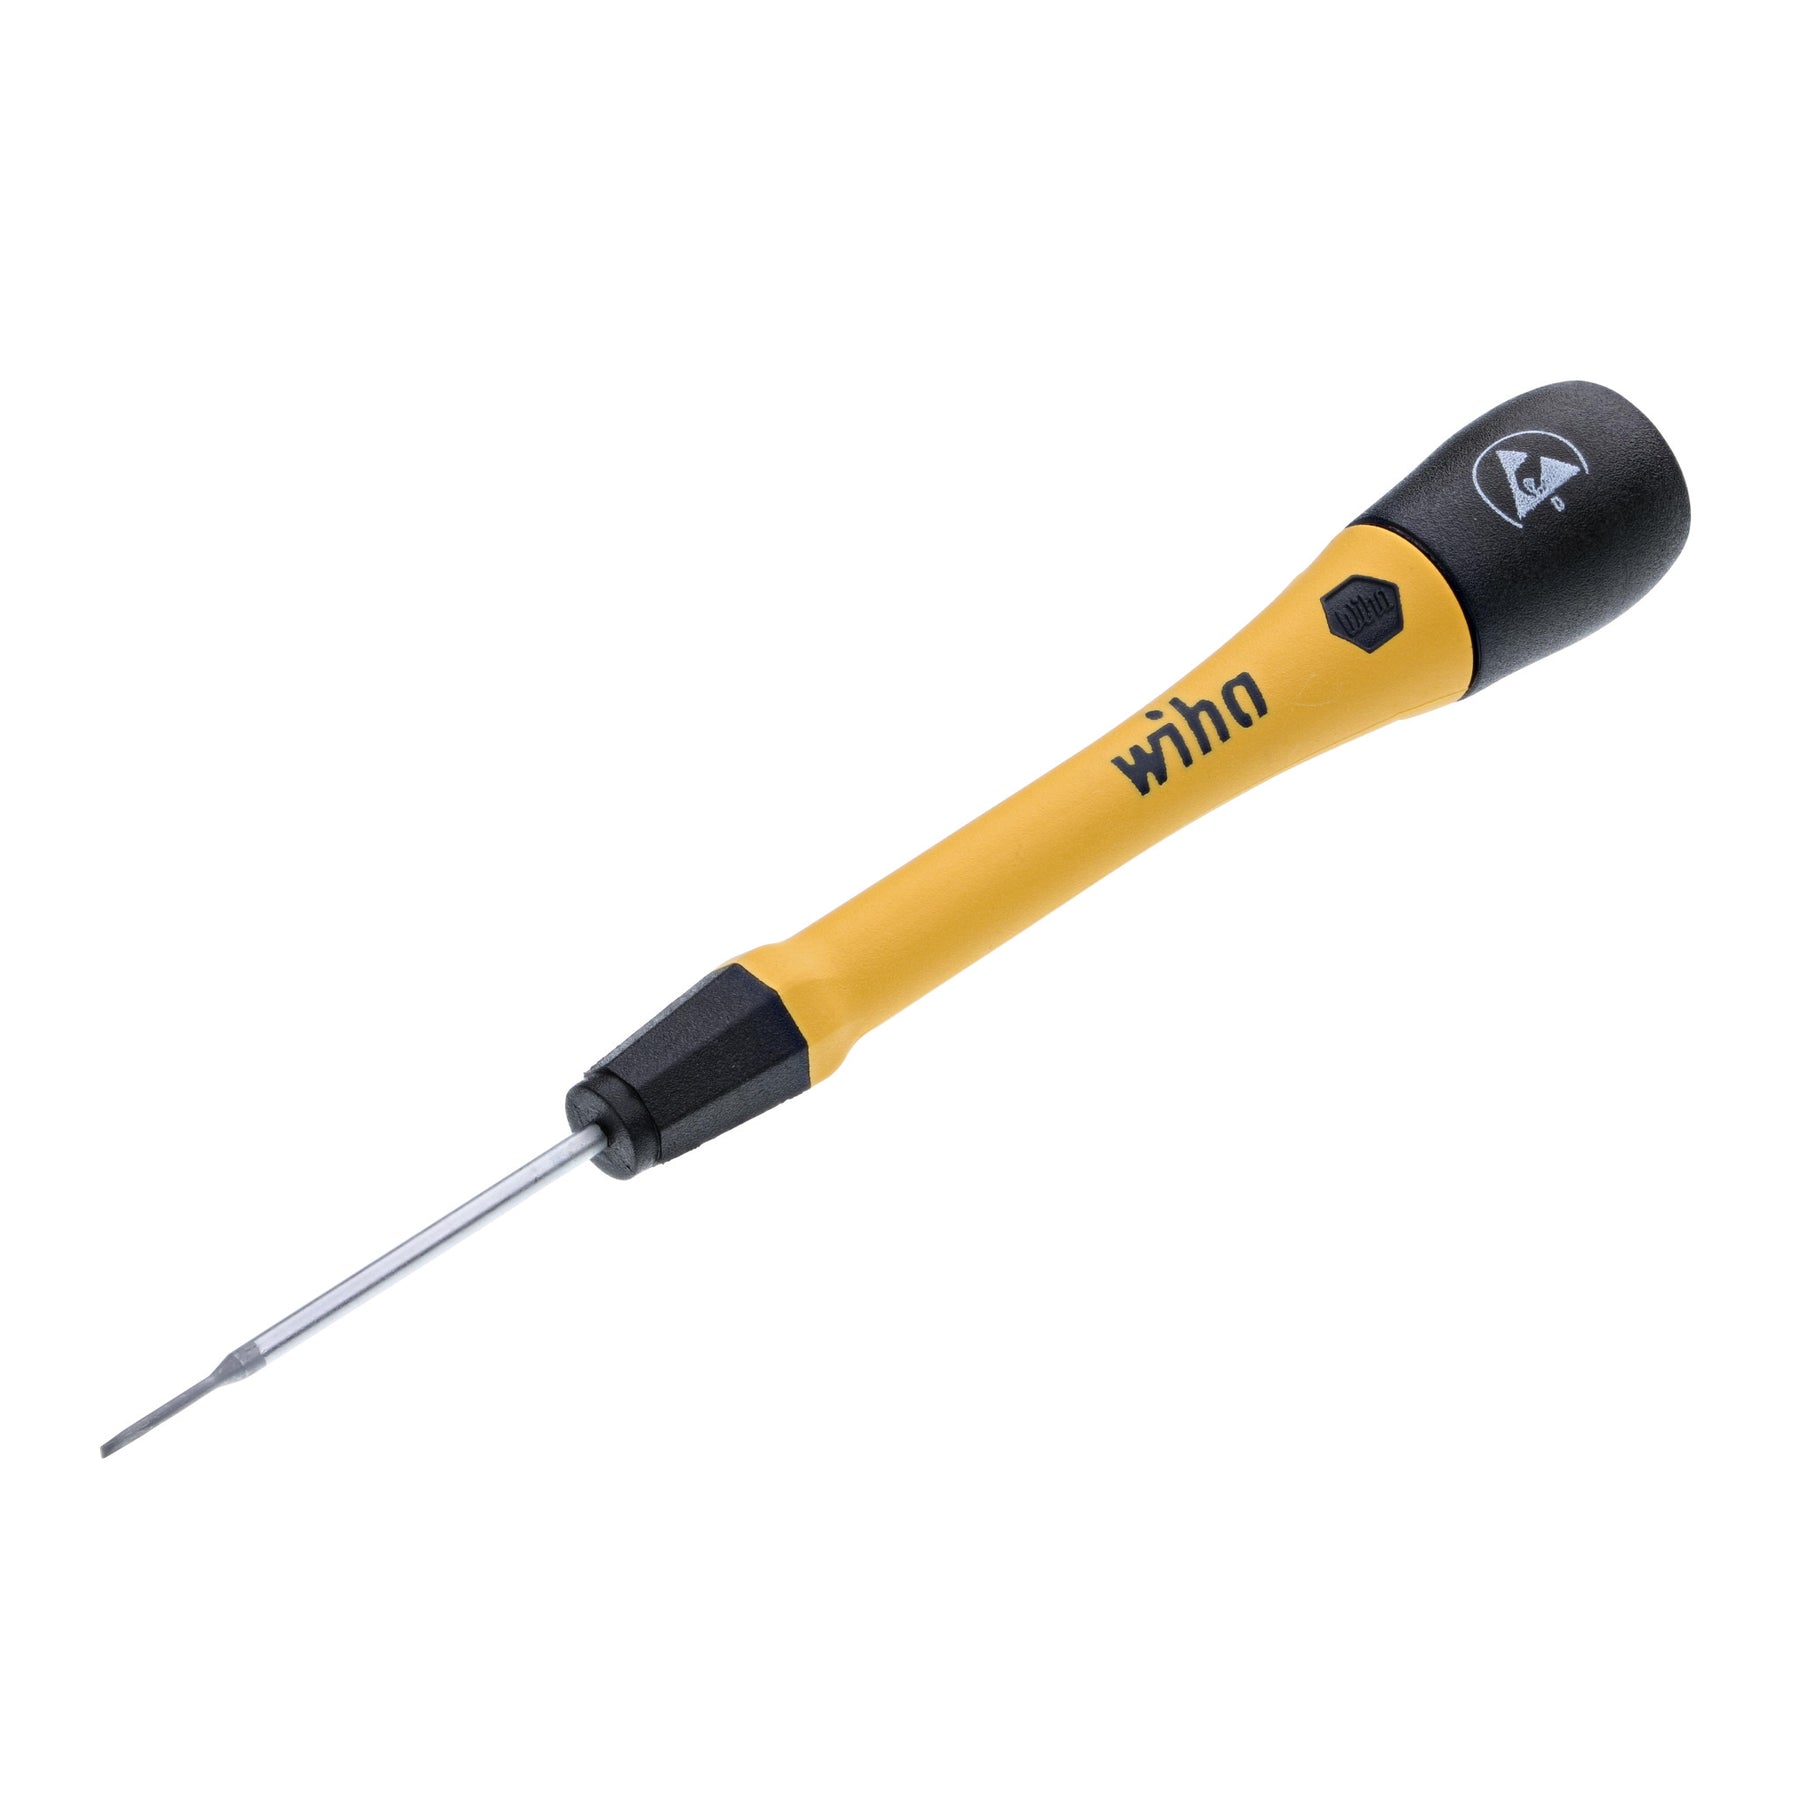 ESD Safe PicoFinish Precision Screwdriver - Slotted 1.0mm x 40mm